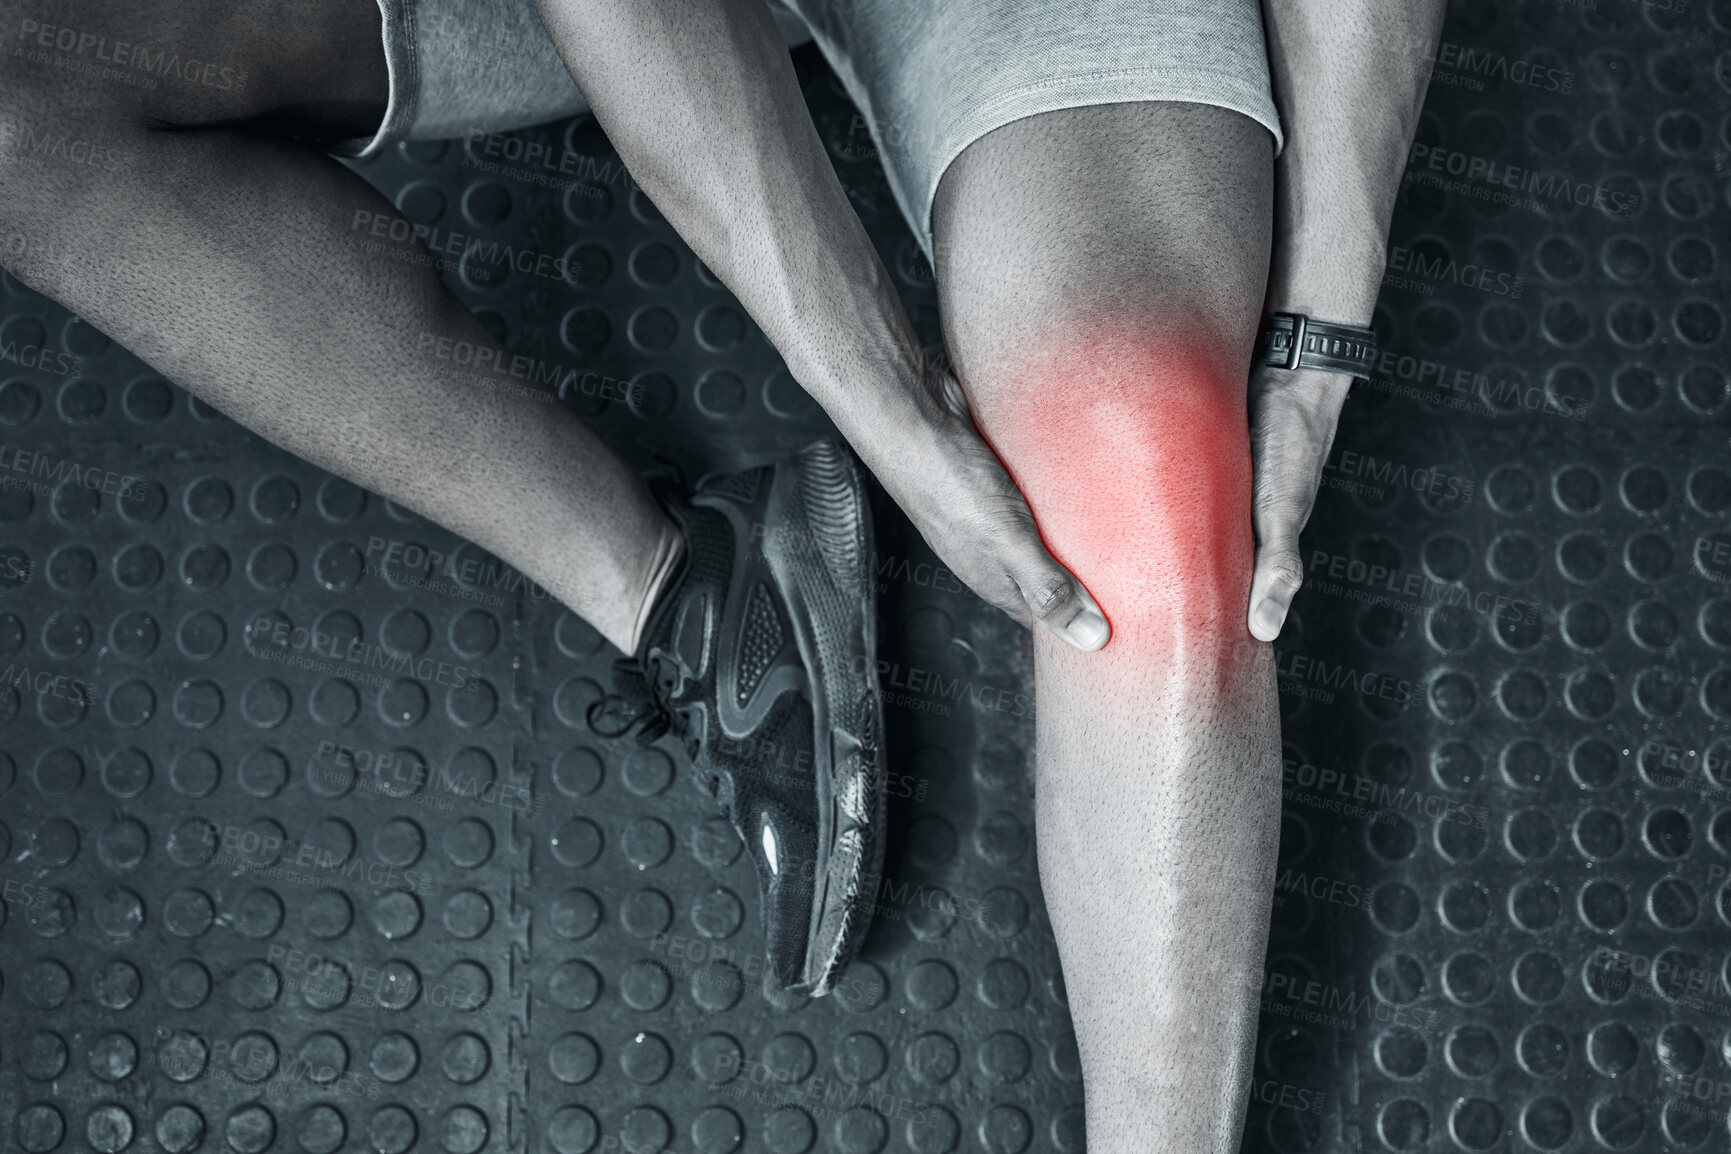 Buy stock photo Joint ache is common in the gym. Trainer touching their knee in pain from above. The knee joint is prone to injury. Closeup of athlete in pain at the gym. CGI red spot of pain on trainers knee